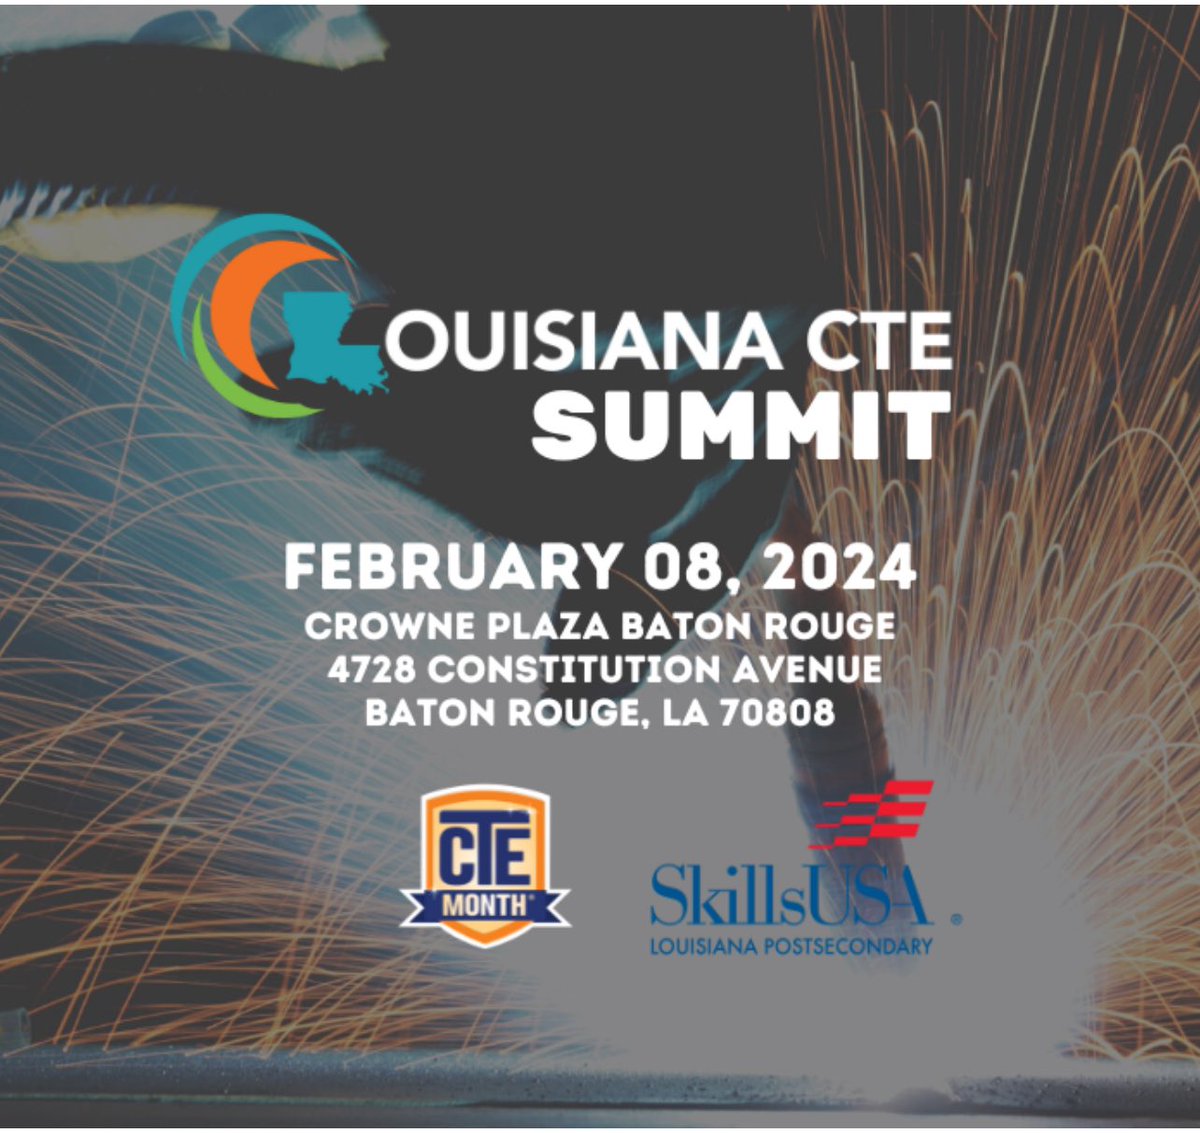 @LouisianaWorks and @golctcs are #workingtogether to engage all populations to grow Louisiana’s #workforce.  @RiverParishesCC is proud to be part of the solution. #adulted #dualenrollment #IncumbentWorker #CTESummit